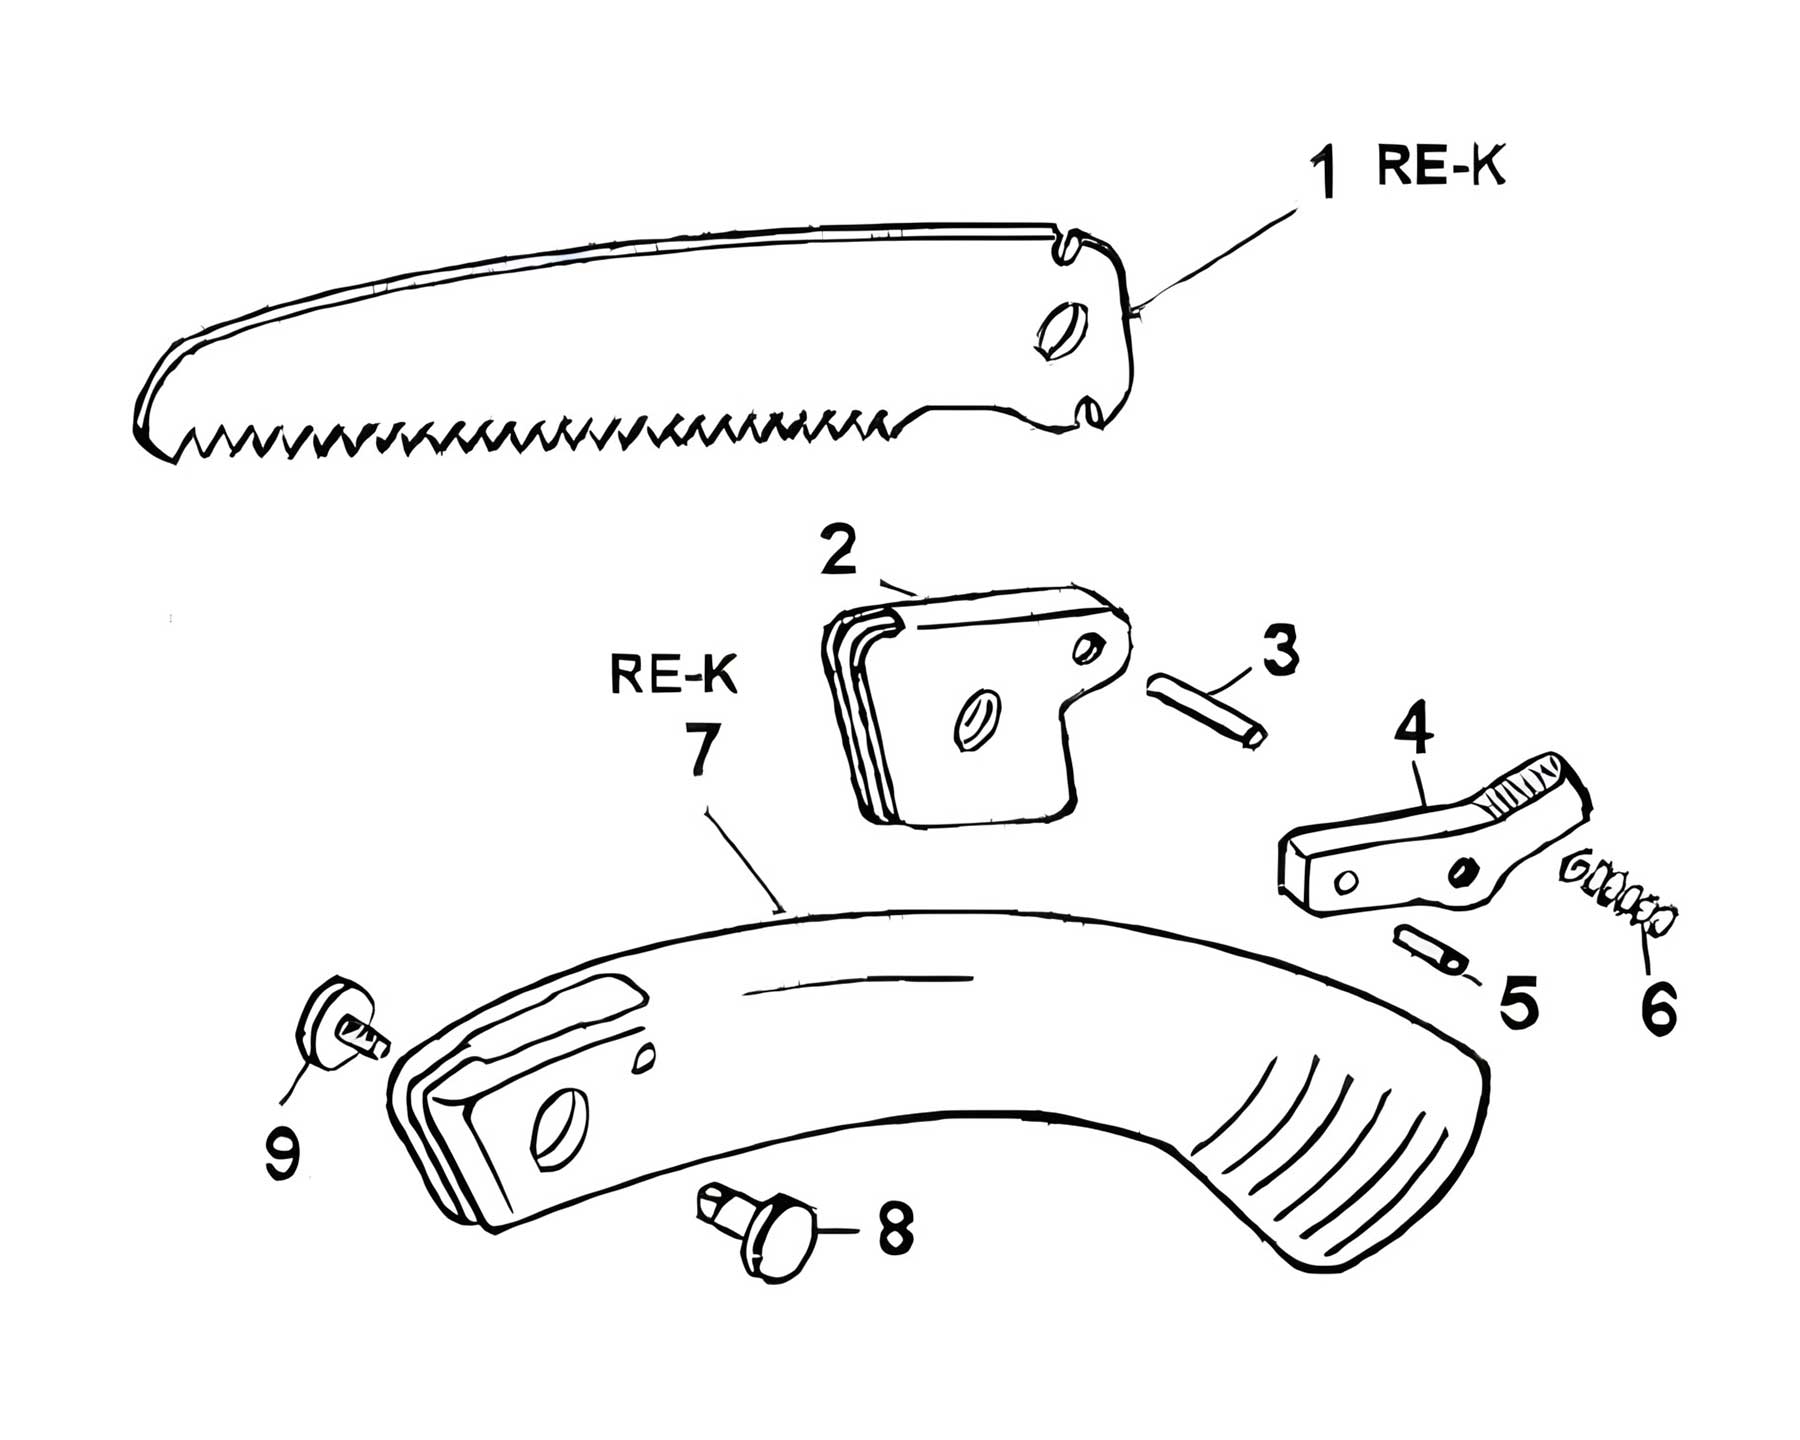 Diagram of disassembled parts for Wolf folding pruning saw